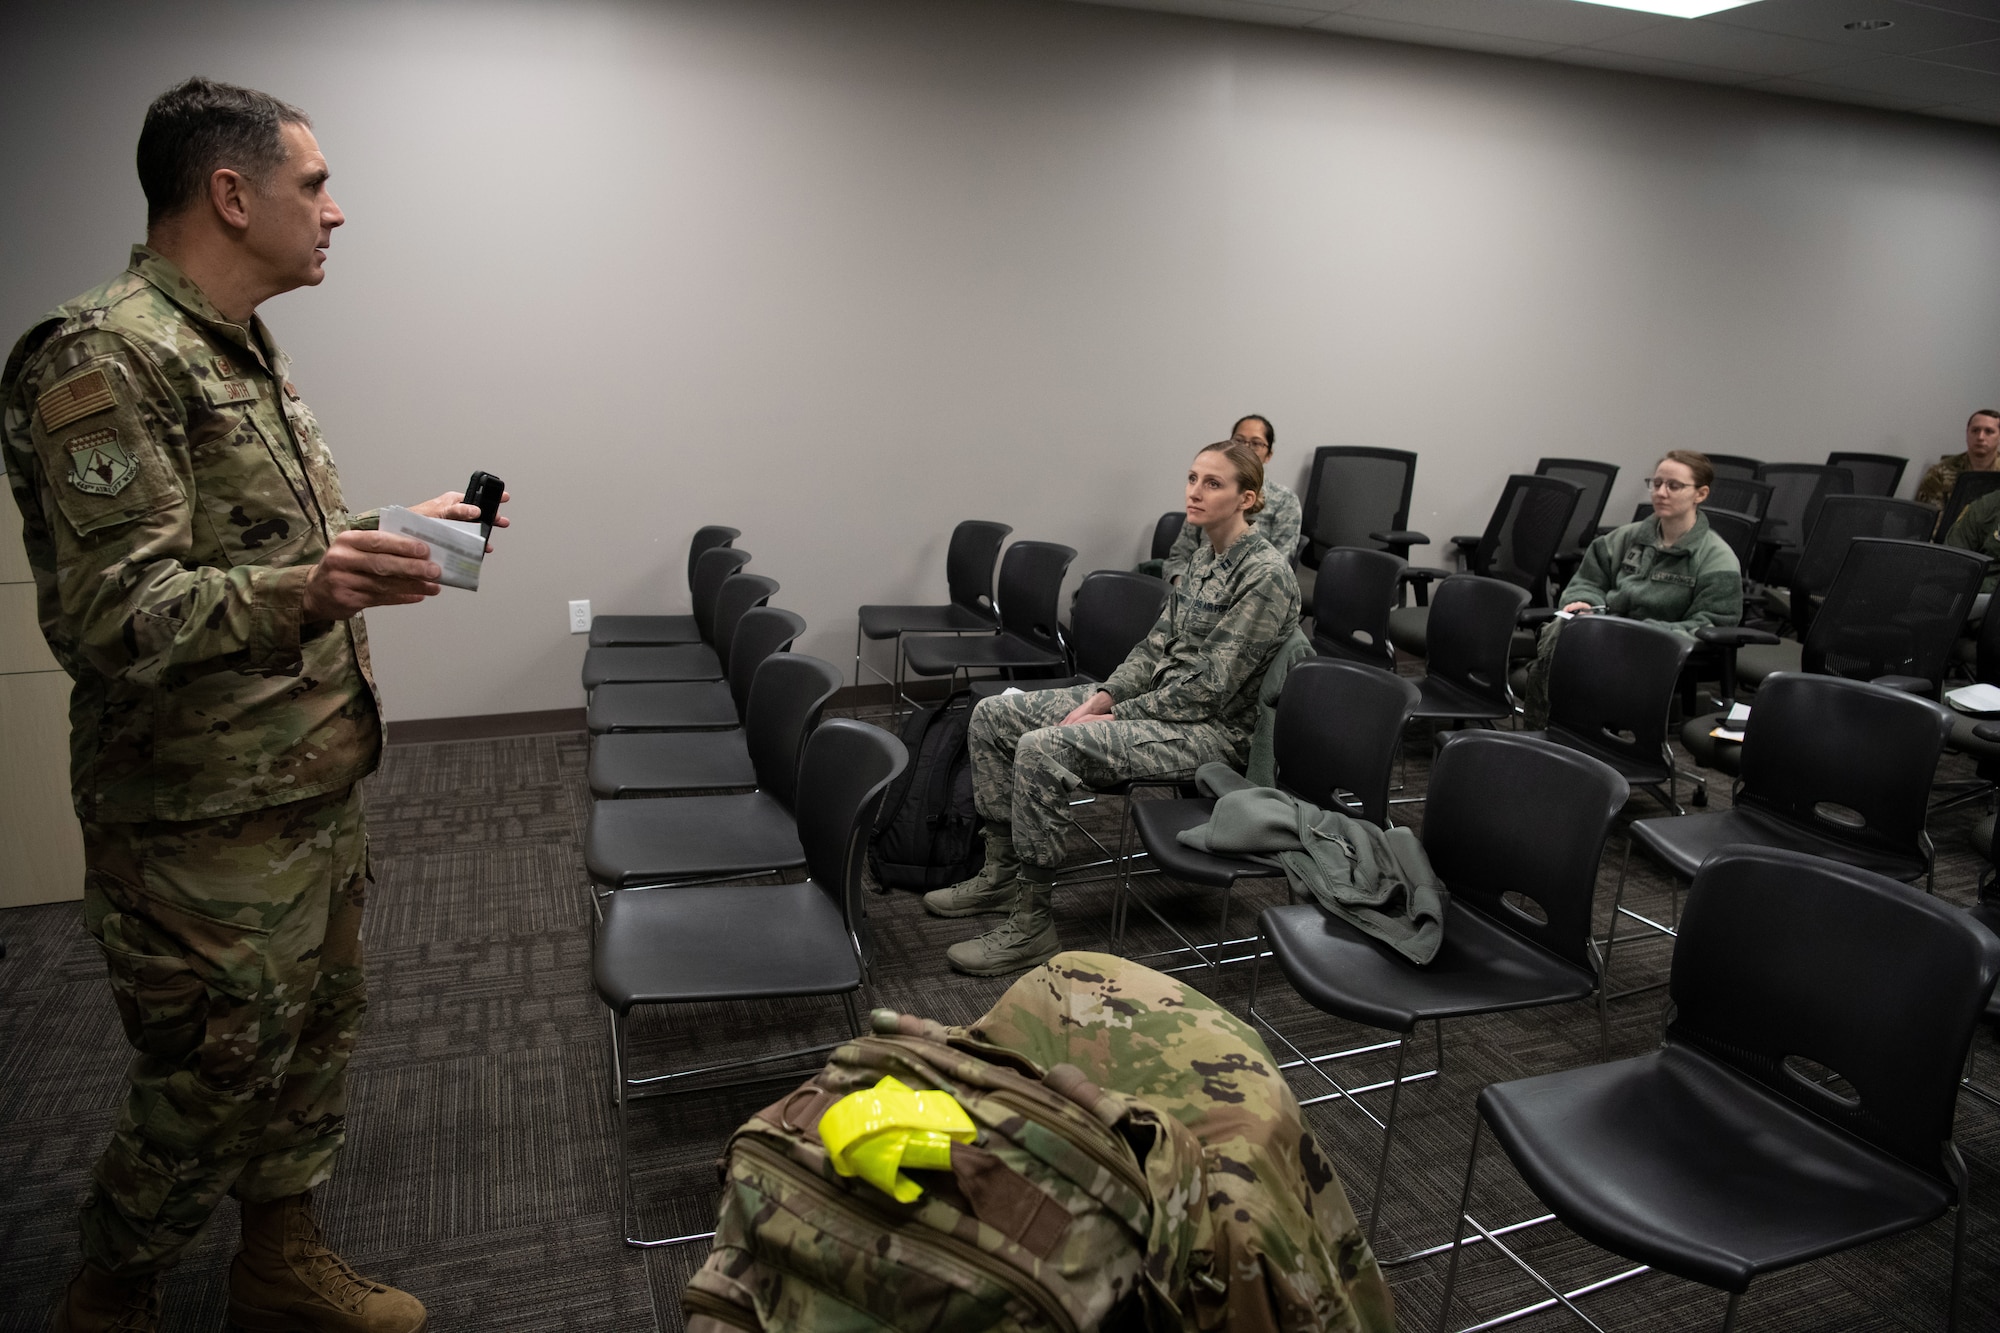 Col. Raymond A. Smith, Jr., 445th Airlift Wing commander, briefs deploying members from the 445th Airlift Wing’s Aerospace Medicine and Aeromedical Staging Squadrons, during out-processing here April 5, 2020.  Airmen from the 445th Airlift Wing were notified April 4, 2020 that they would be mobilized to New York City to help with the COVID-19 pandemic. The Citizen Airmen will join other military personnel providing medical services at the Jacob Javits Center in New York City. This deployment is part of a larger mobilization package of more than 120 doctors, nurses and respiratory technicians Air Force Reserve units across the nation provided over the past 48 hours in support of COVID-19 response to take care of Americans.  (U.S. Air Force photo/Mr. Patrick O’Reilly)